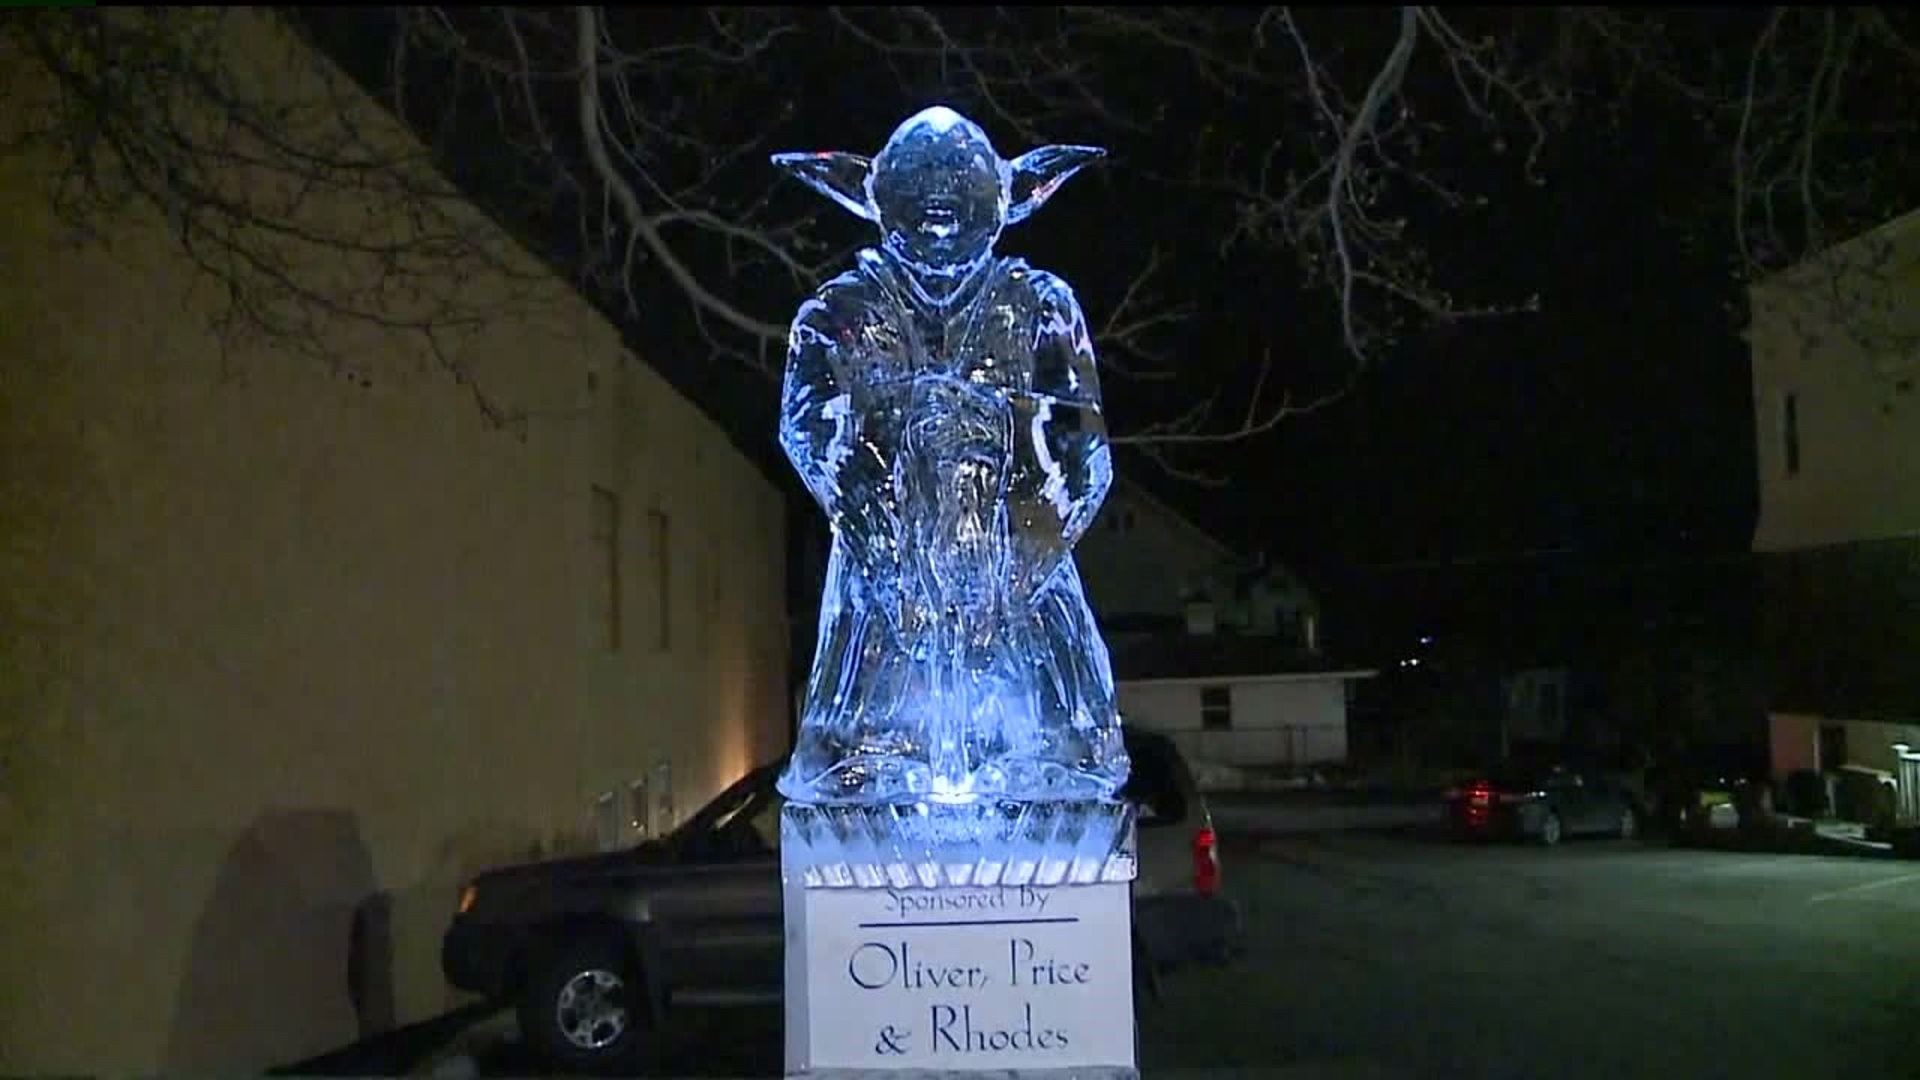 Warmer Weather for Ice Festival